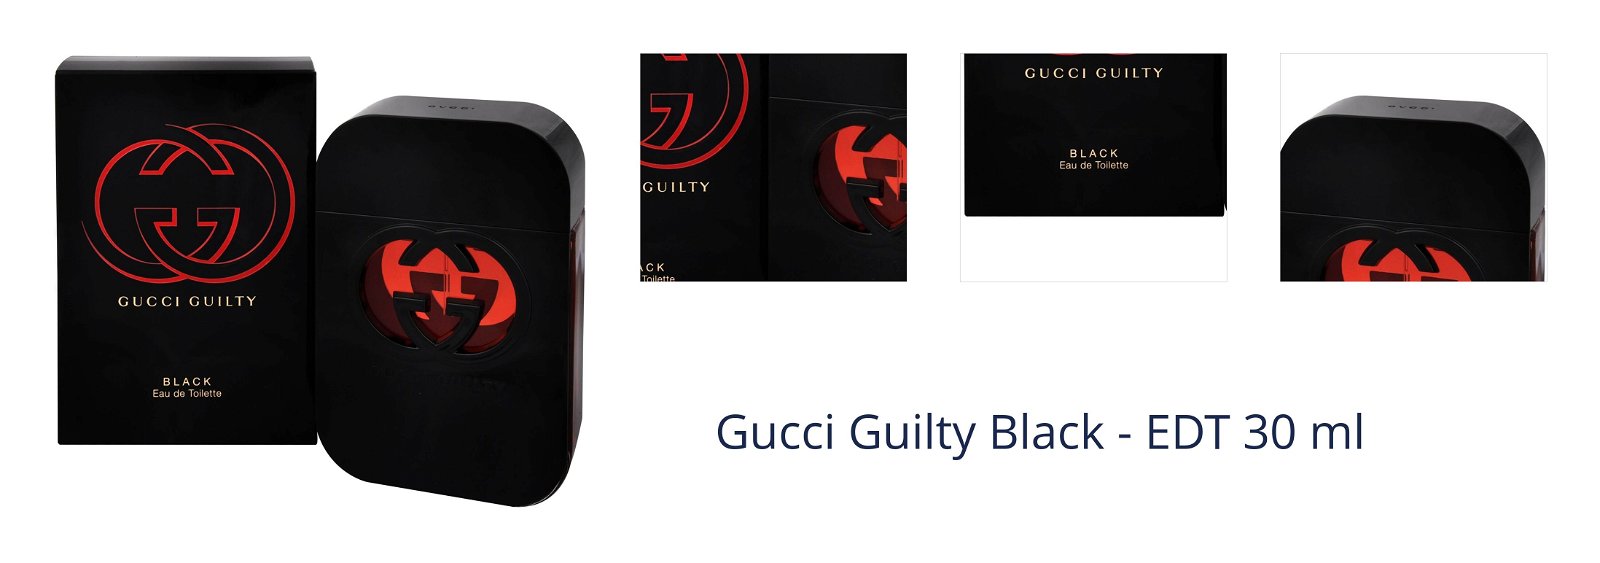 Gucci Guilty Black - EDT 30 ml 1